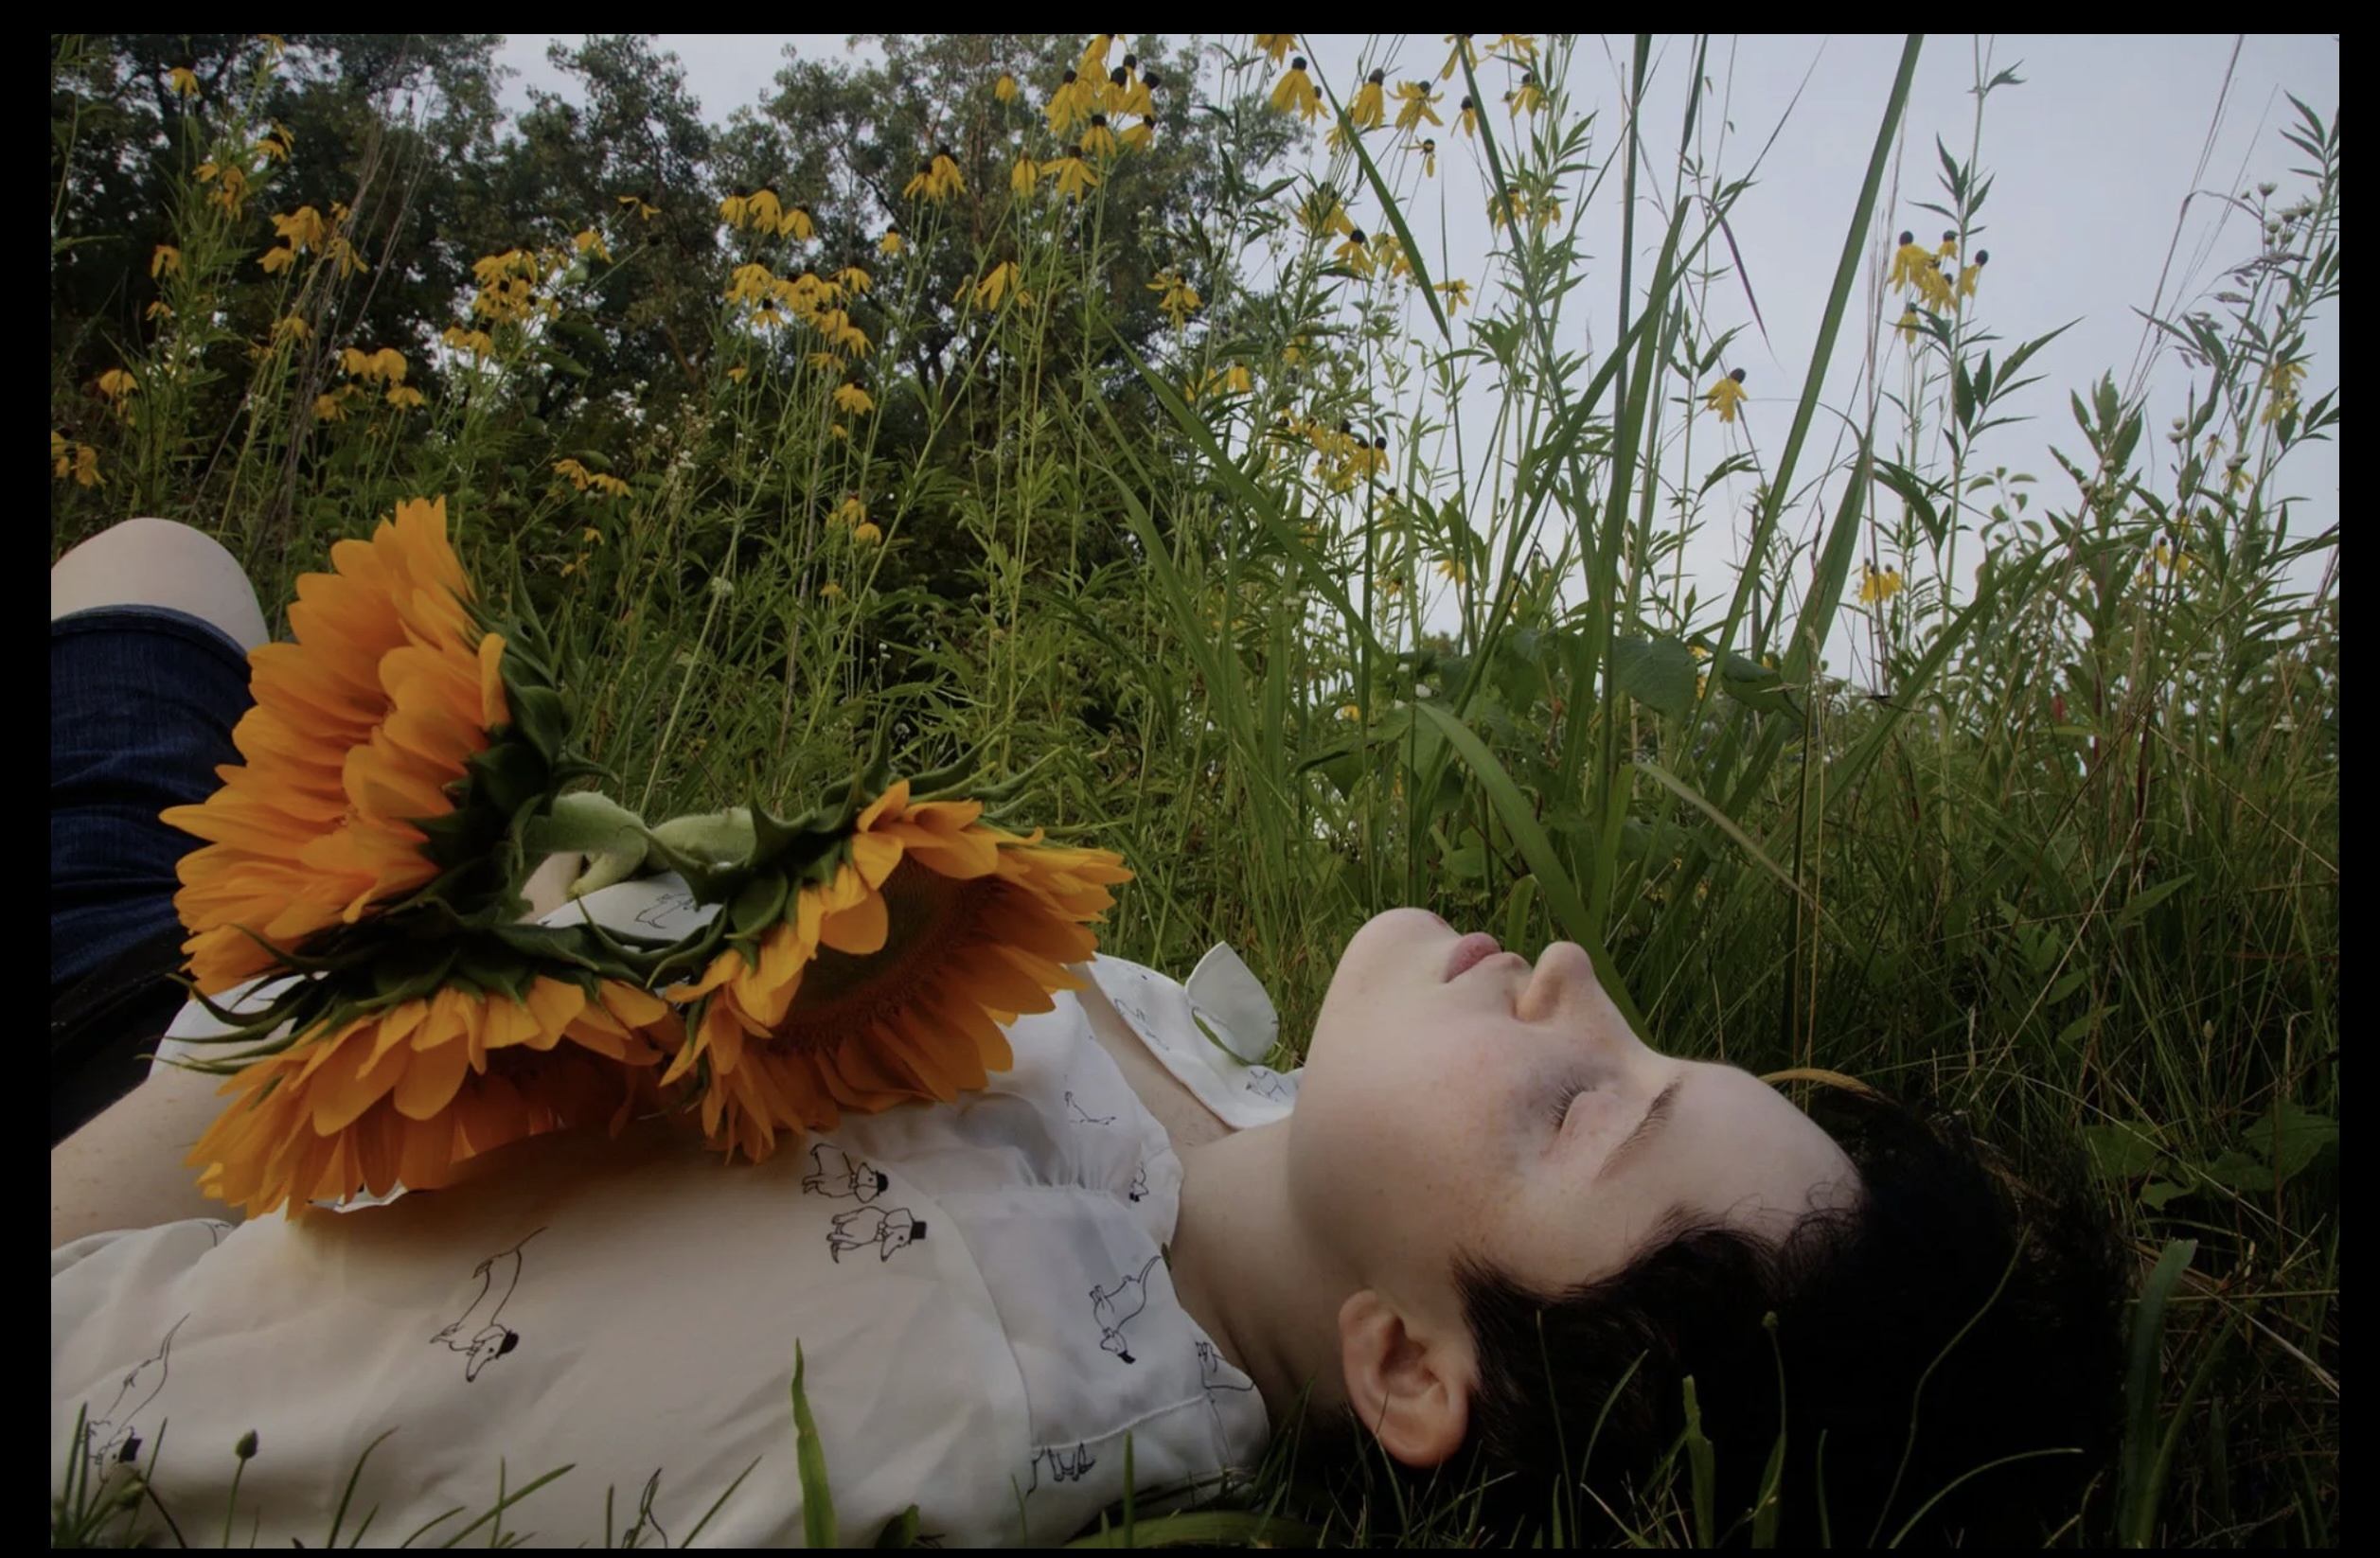 A young man is lying in tall grass holding a bouquet of sunflowers